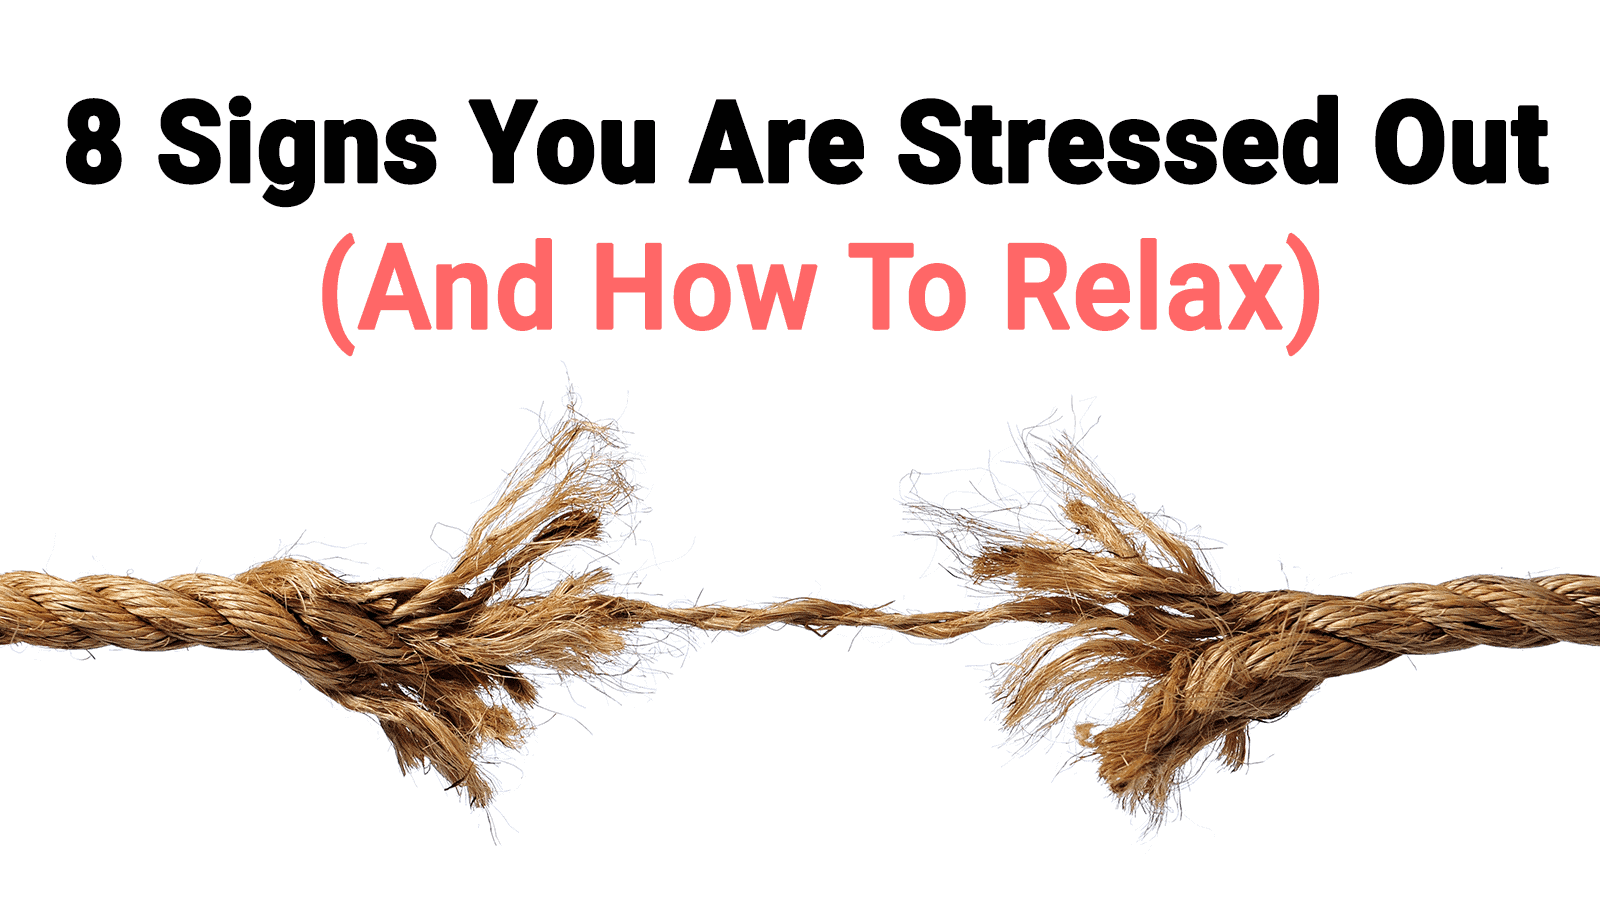 8 Signs You Are Stressed Out (And How To Relax)